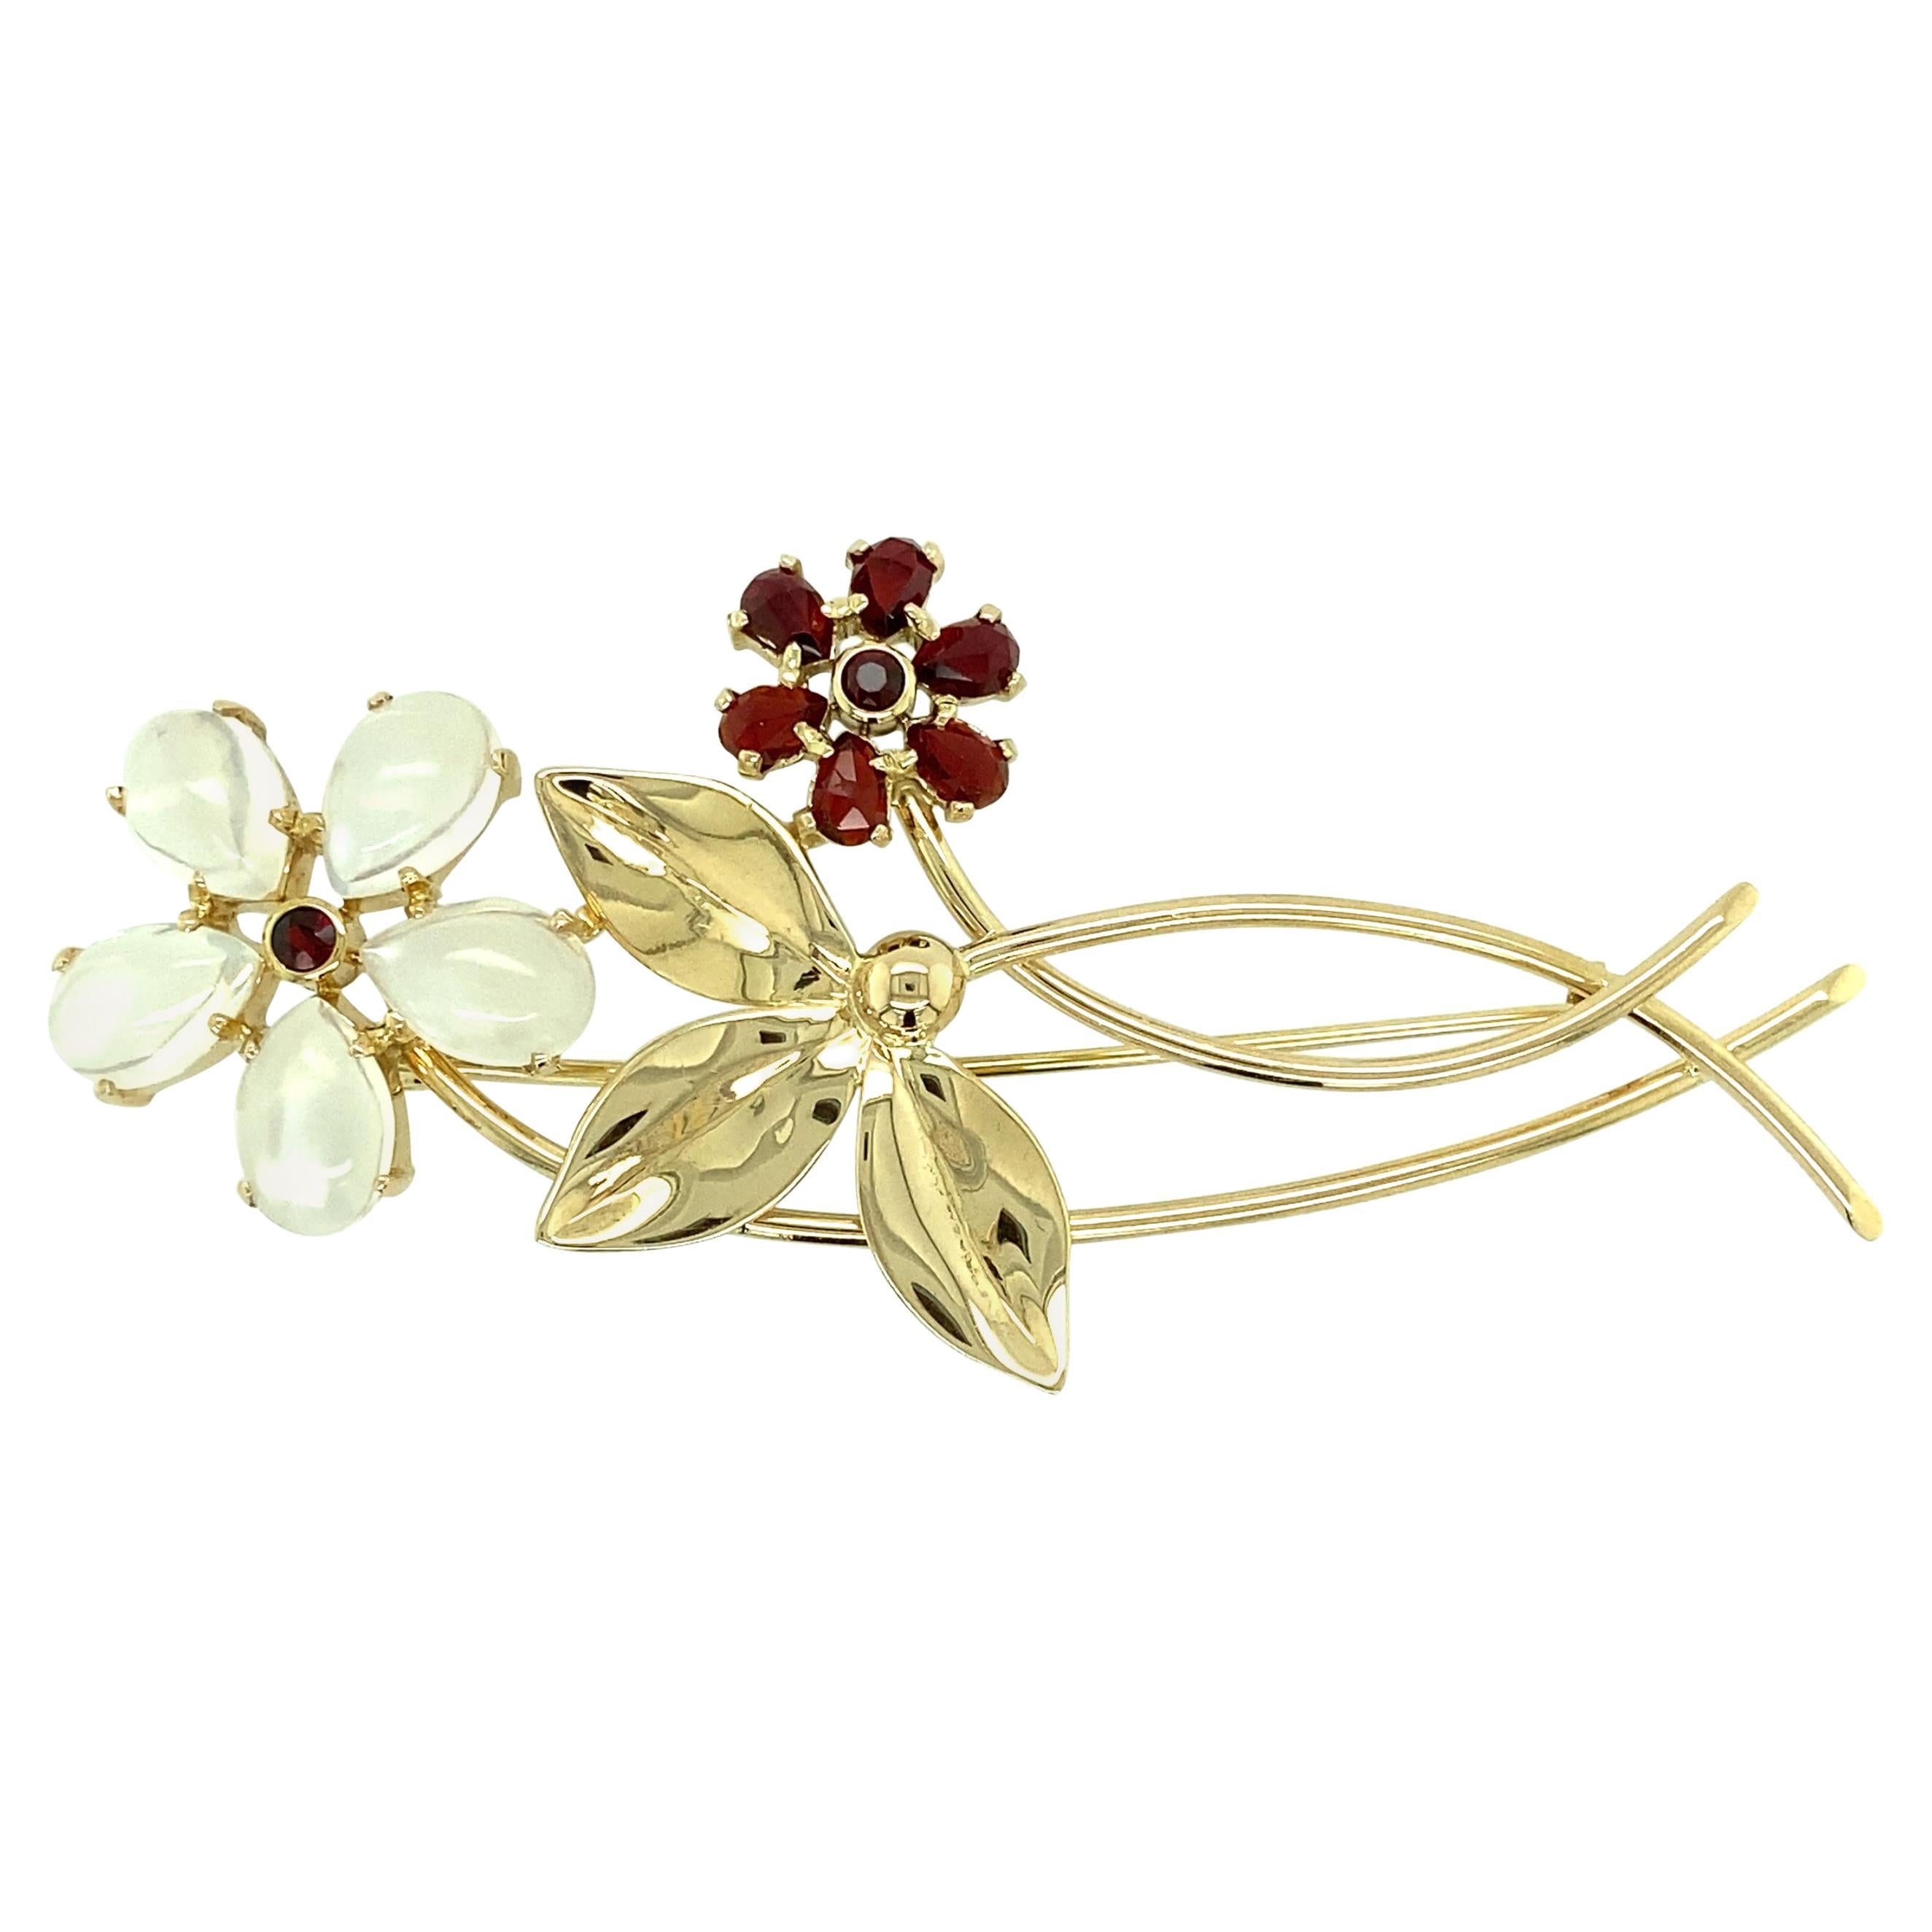 One 14 karat yellow gold Tiffany & Co. flower pin set with five 11.45x6.80mm moonstones and eight garnets.  The pin measures 3 inches long, 1.5 inches wide and is complete with a traditional pin closure. 13.85 grams total.  